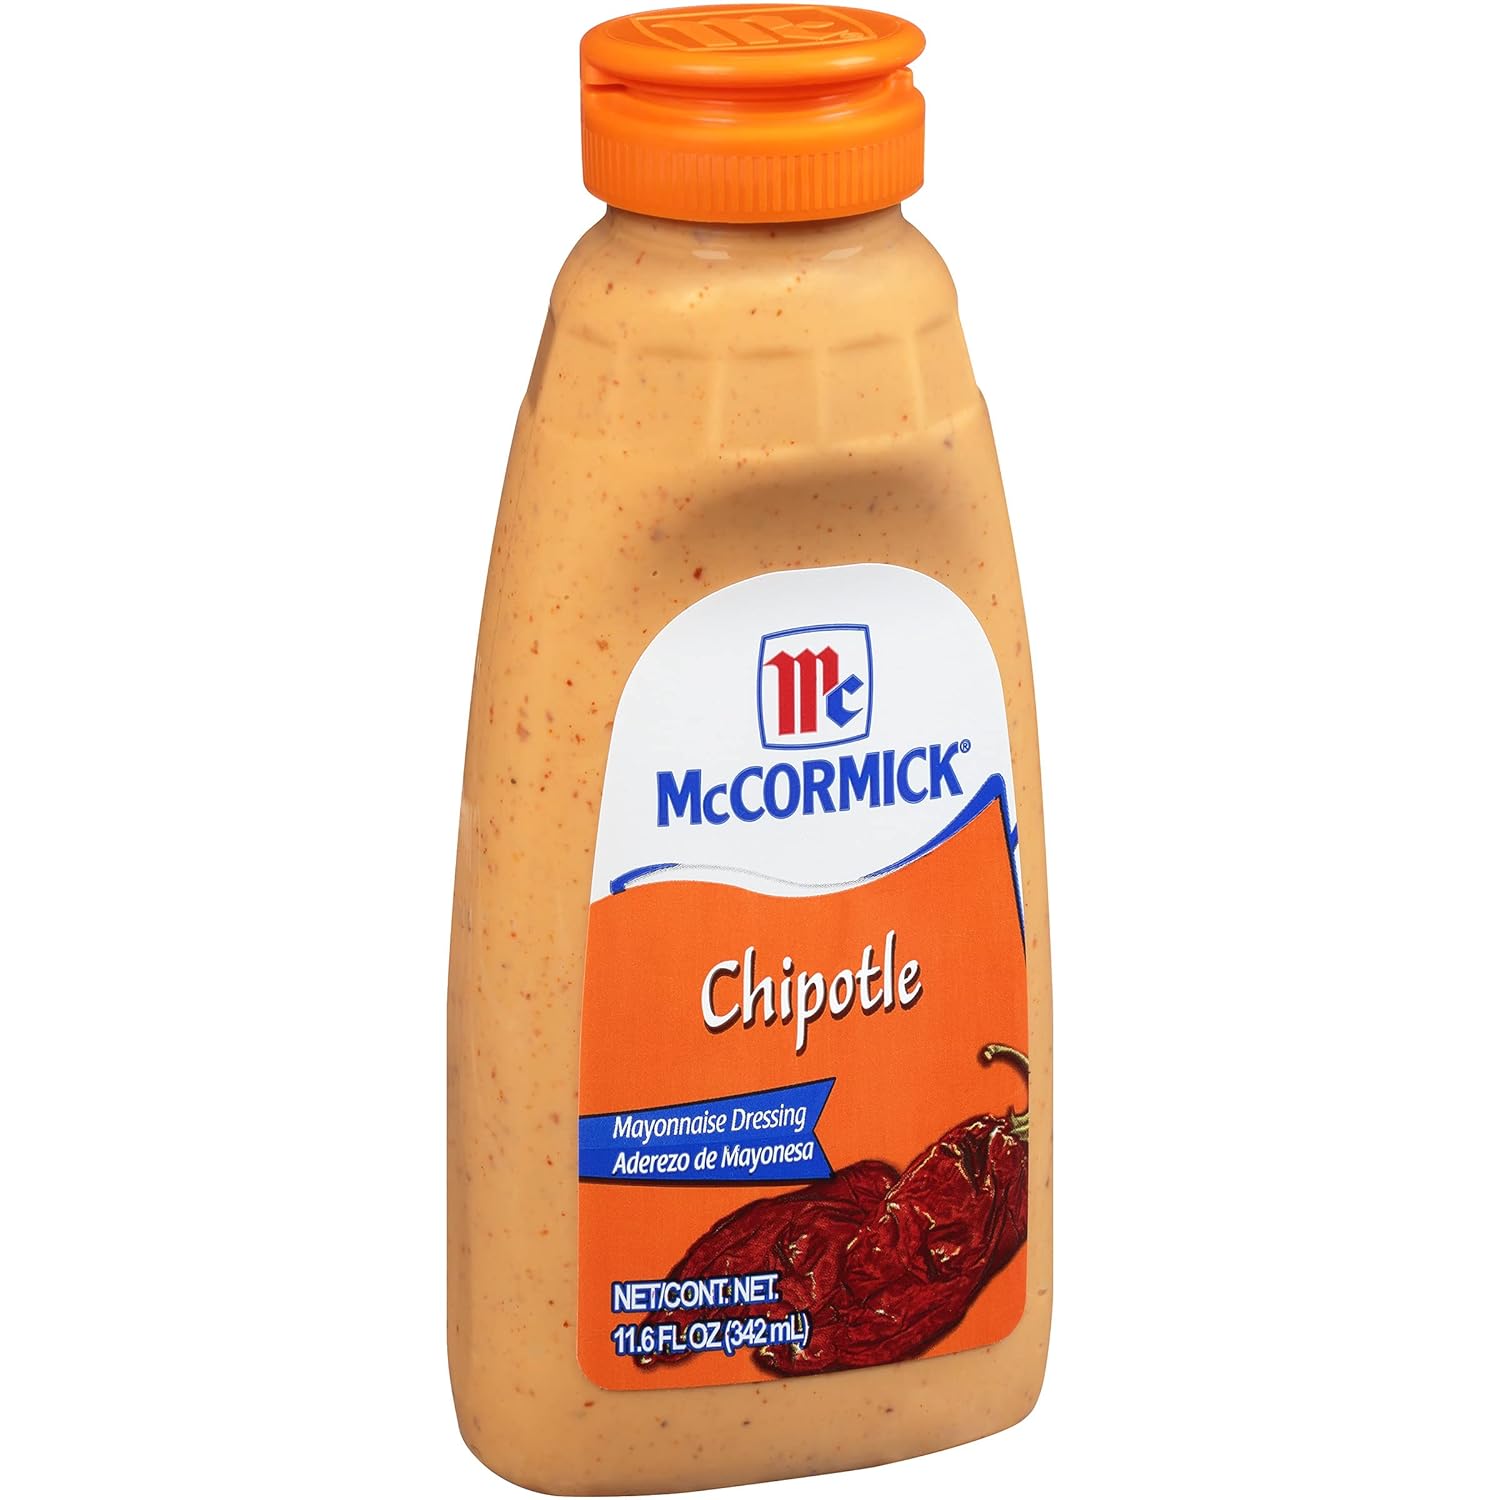 McCormick Chipotle Mayonnaise Dressing, 11.6 fl oz (Pack of 6)